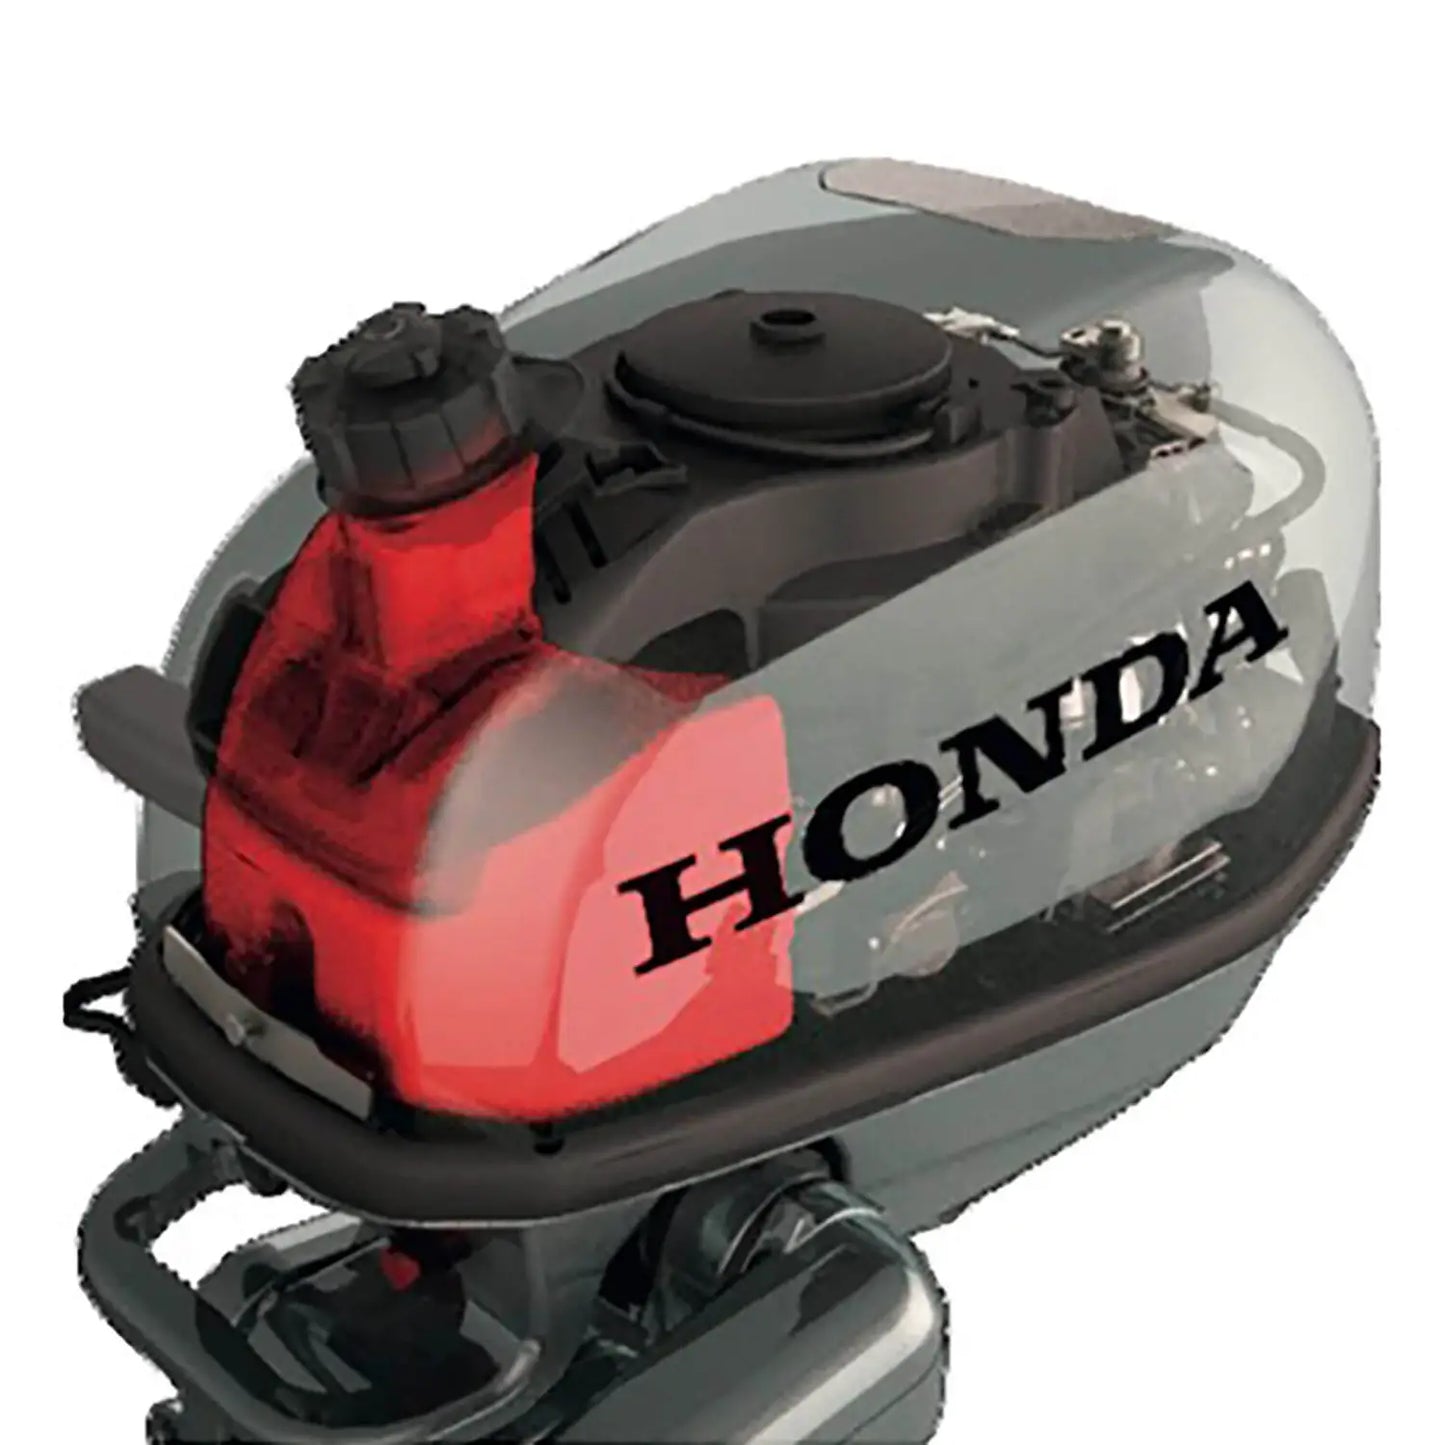 Honda Outboard BF6 LHU 6hp Long Shaft Engine with 6 amp charging coil